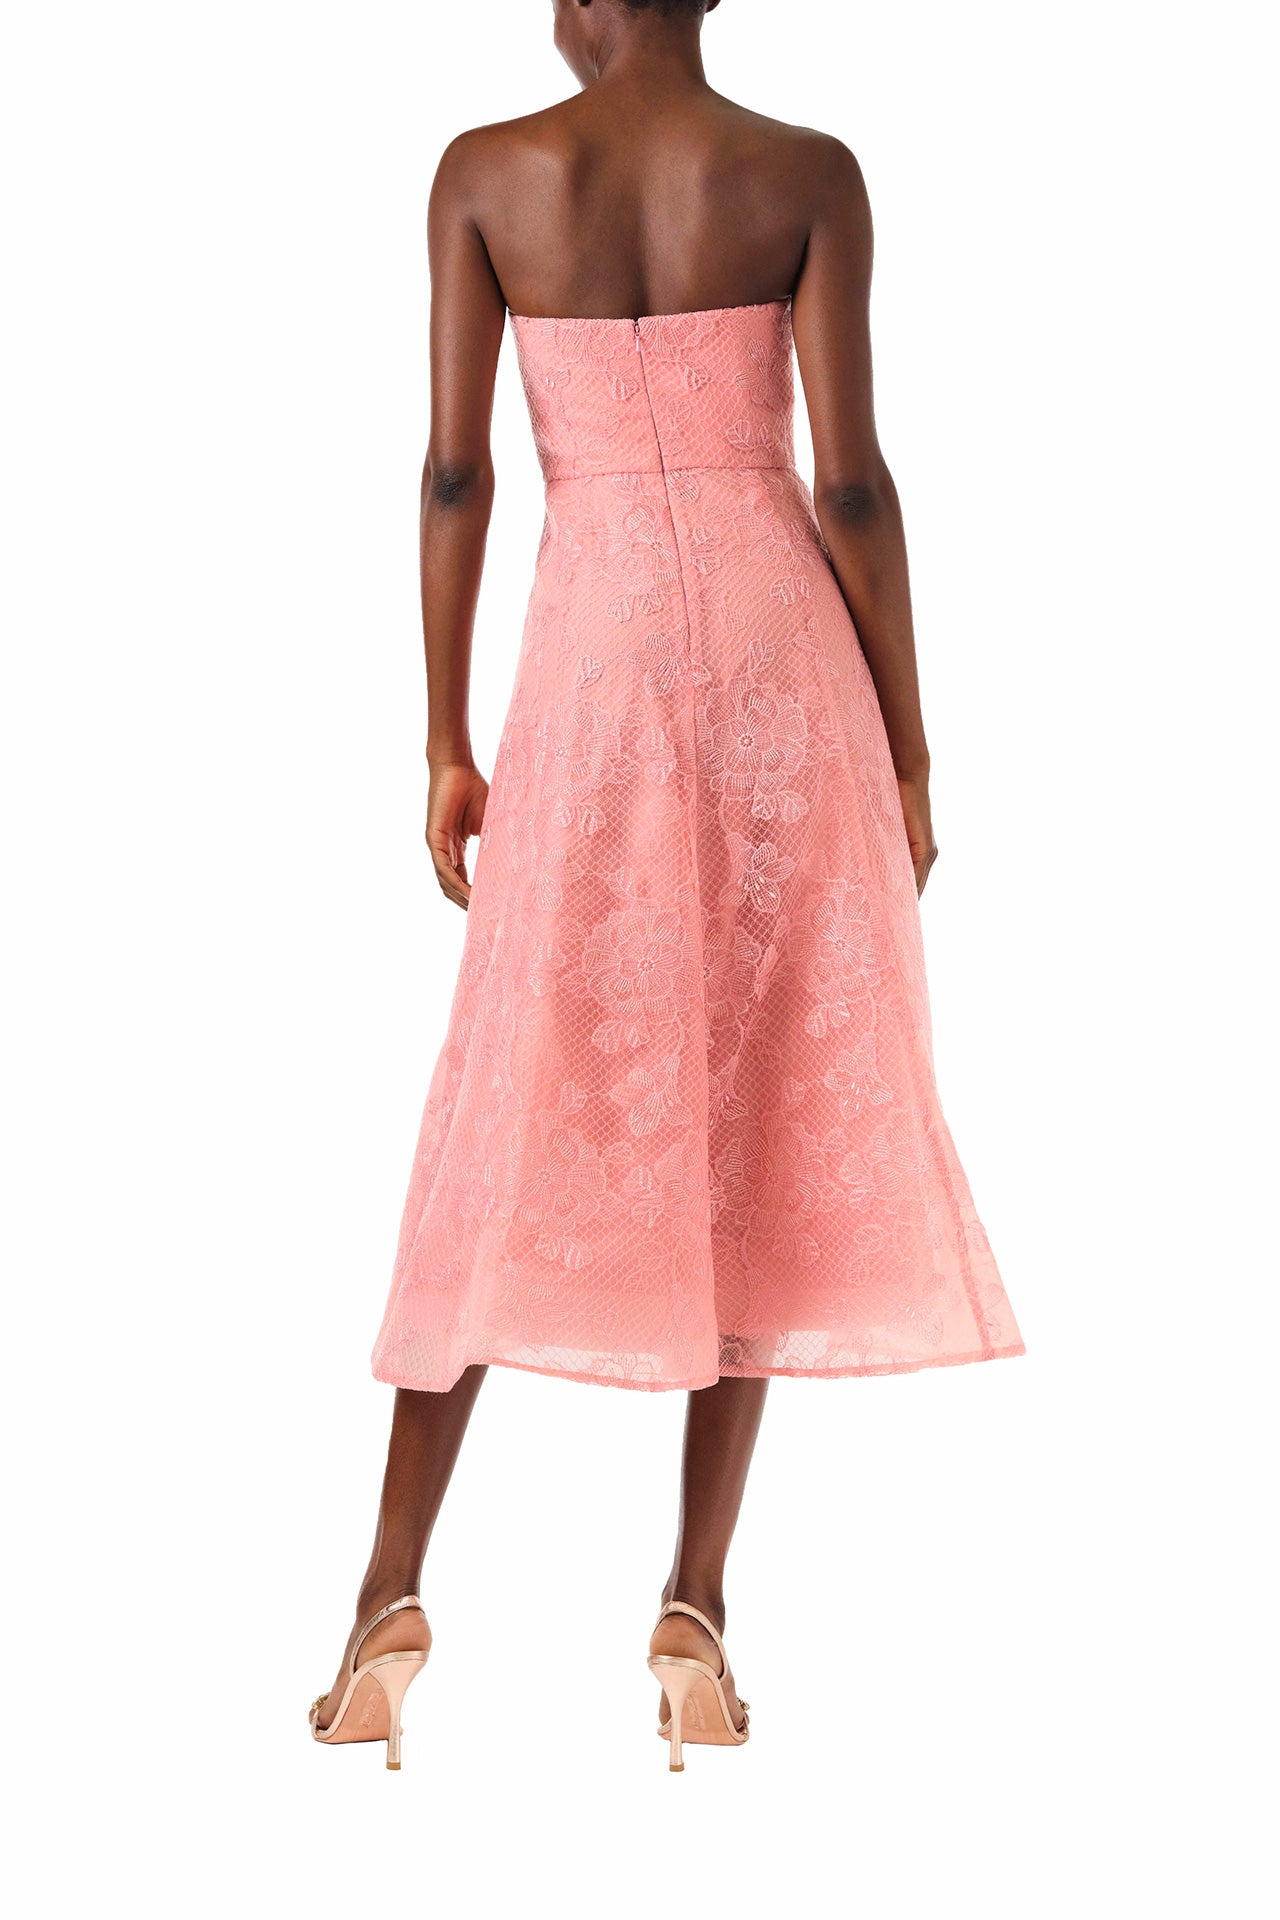 ML Monique Lhuillier 2024 strapless midi dress with flared skirt in Coral Rose embroidered lace - back.